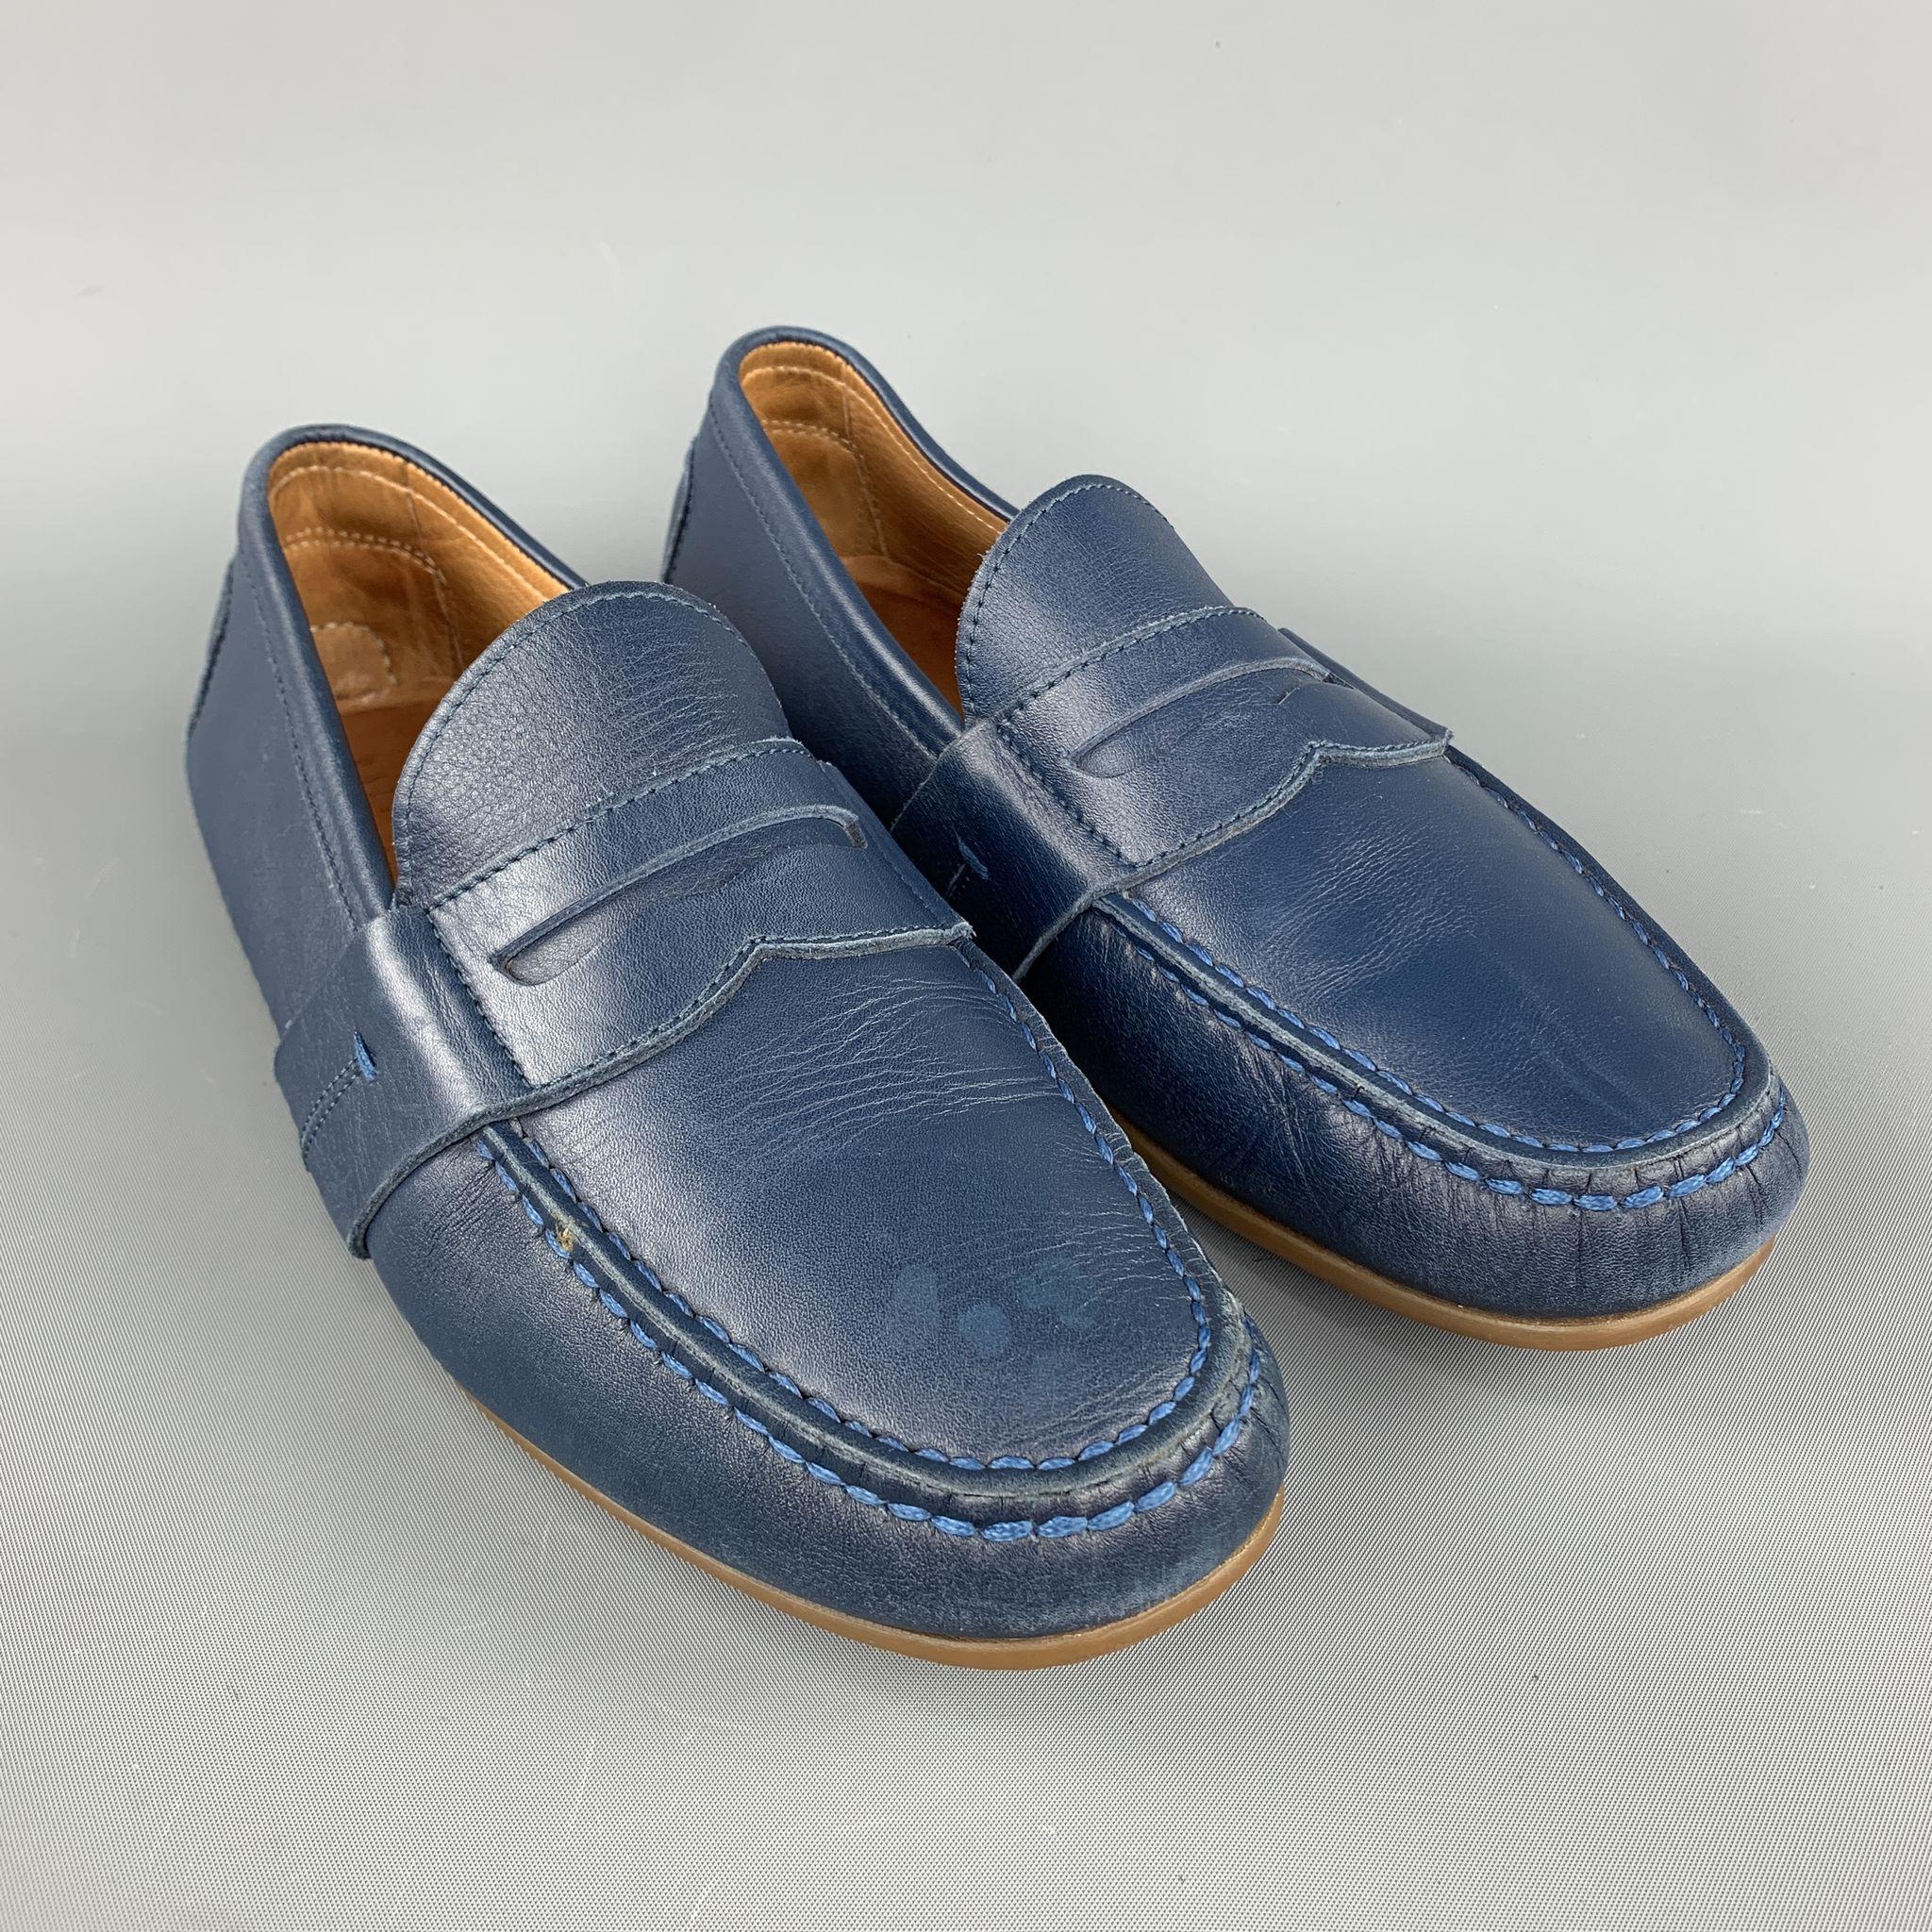 RALPH LAUREN loafers comes in a navy leather featuring a driver style, penny strap, and a rubber sole. Made in Italy.
 
Excellent Pre-Owned Condition.
Marked: 7.5 in.
 
Measurements:
 
Outsole: 10.5 in x 3 in.
SKU: 97265
Category: Loafers

More